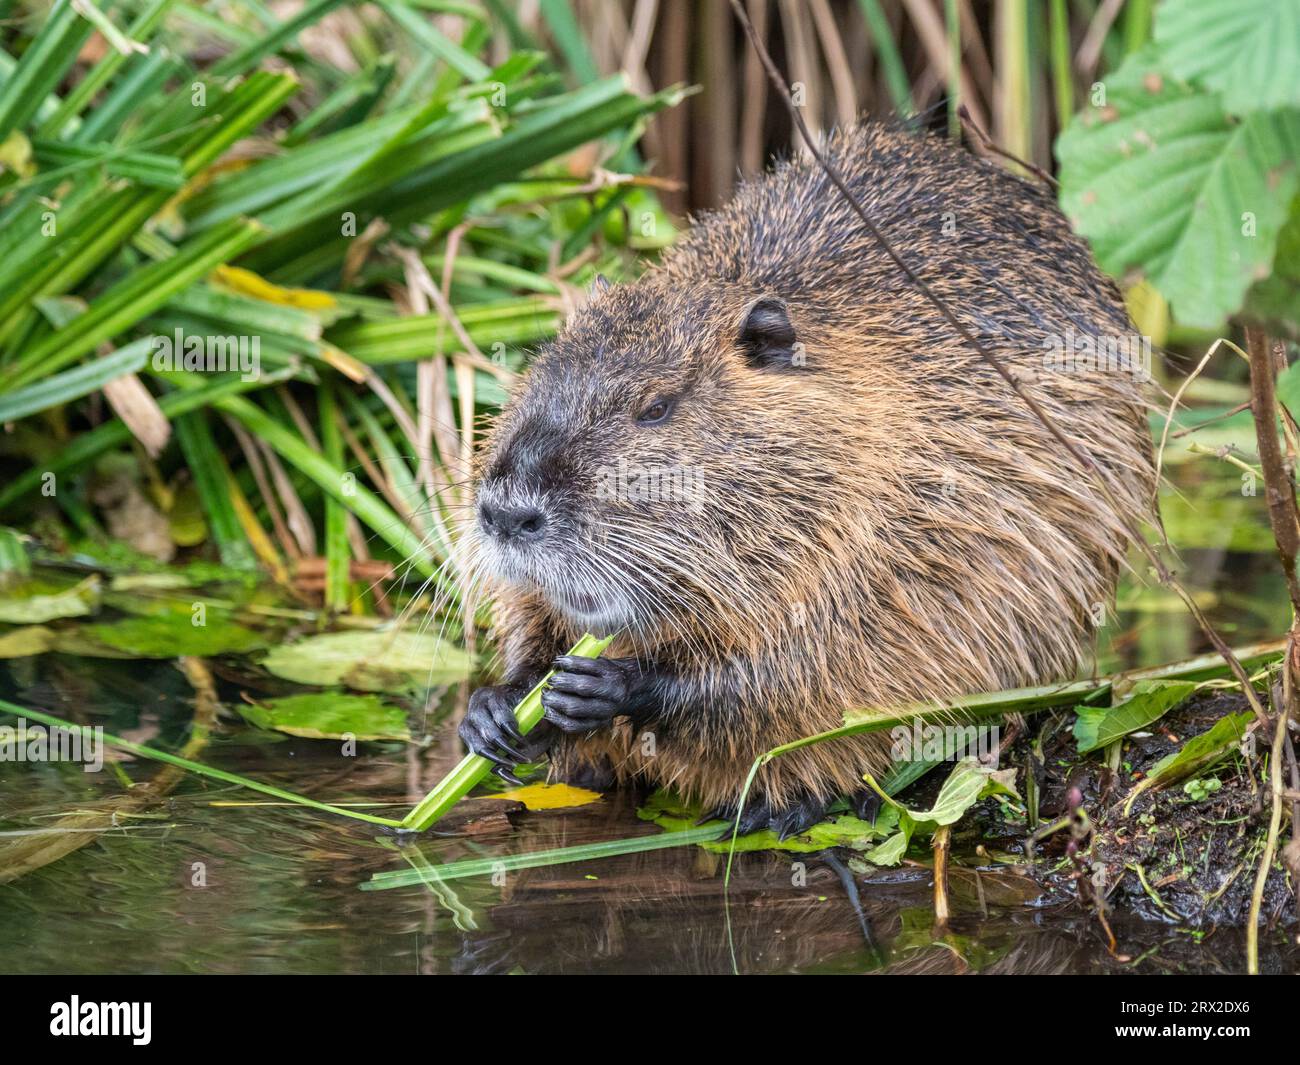 An adult nutria (Myocastor coypus), an invasive species introduced from South America, Spree Forest, Germany, Europe Stock Photo